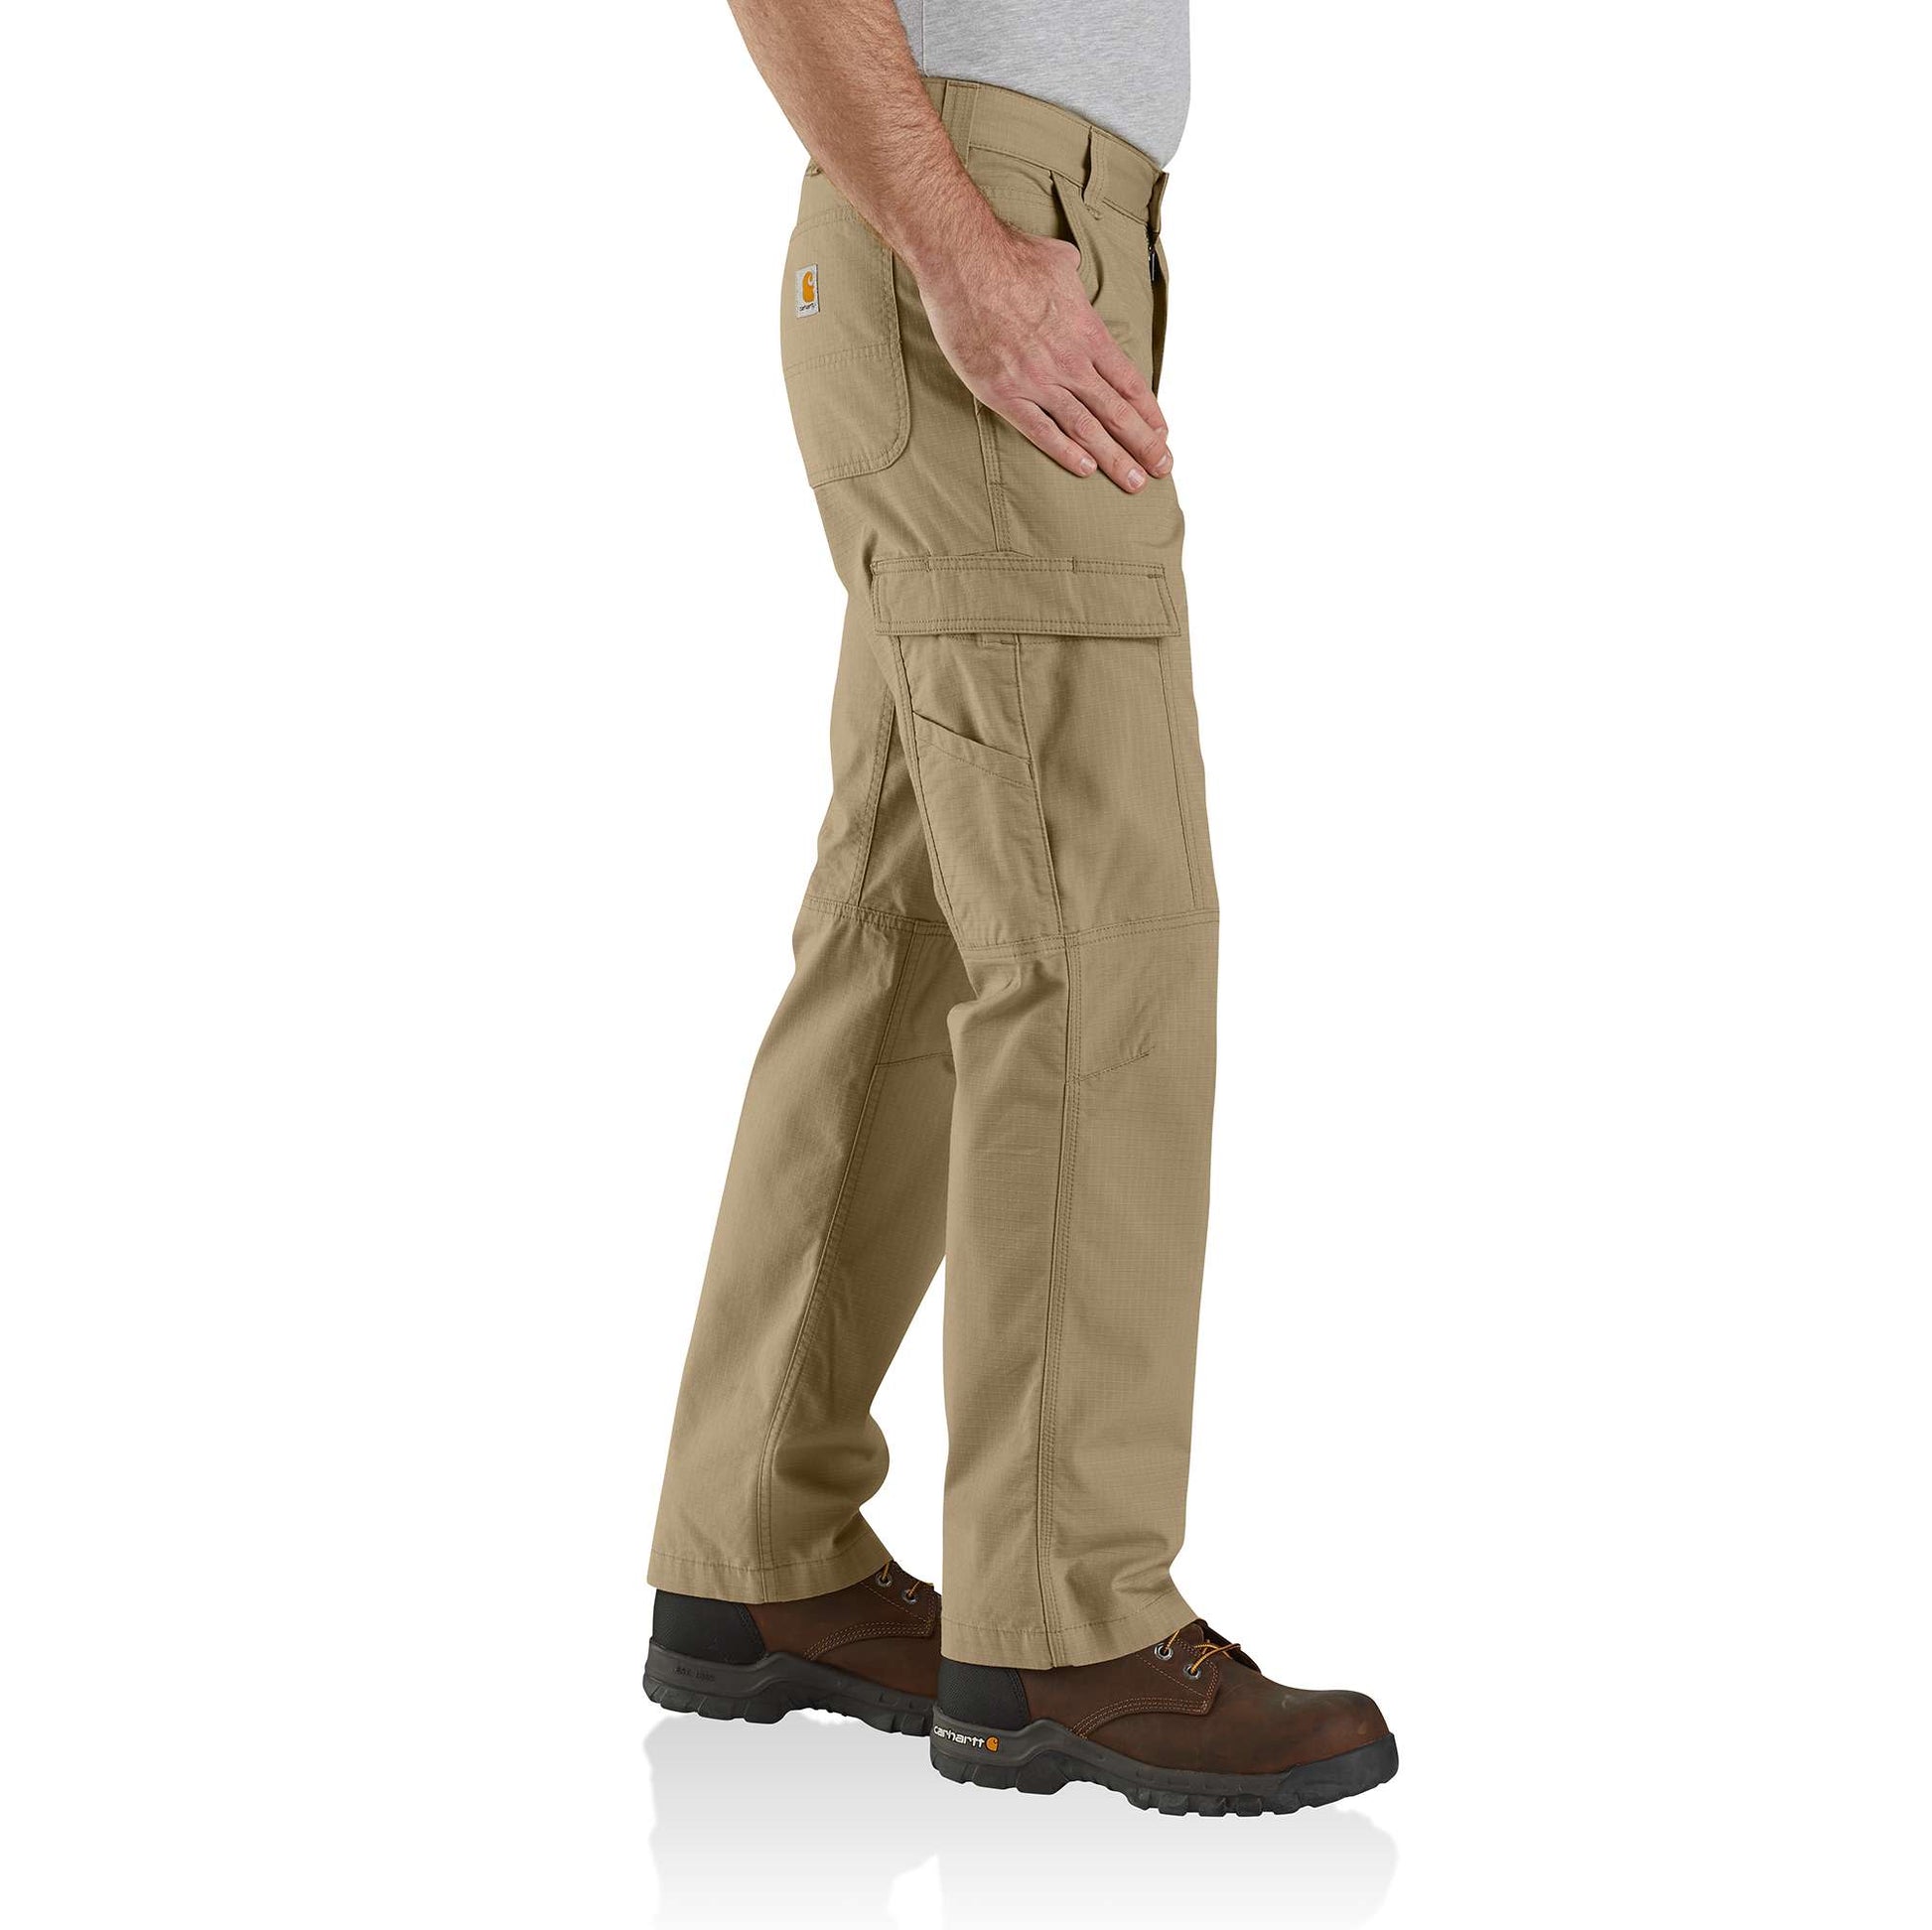 Carhartt Relaxed Fit Ripstop Cargo Work Pant